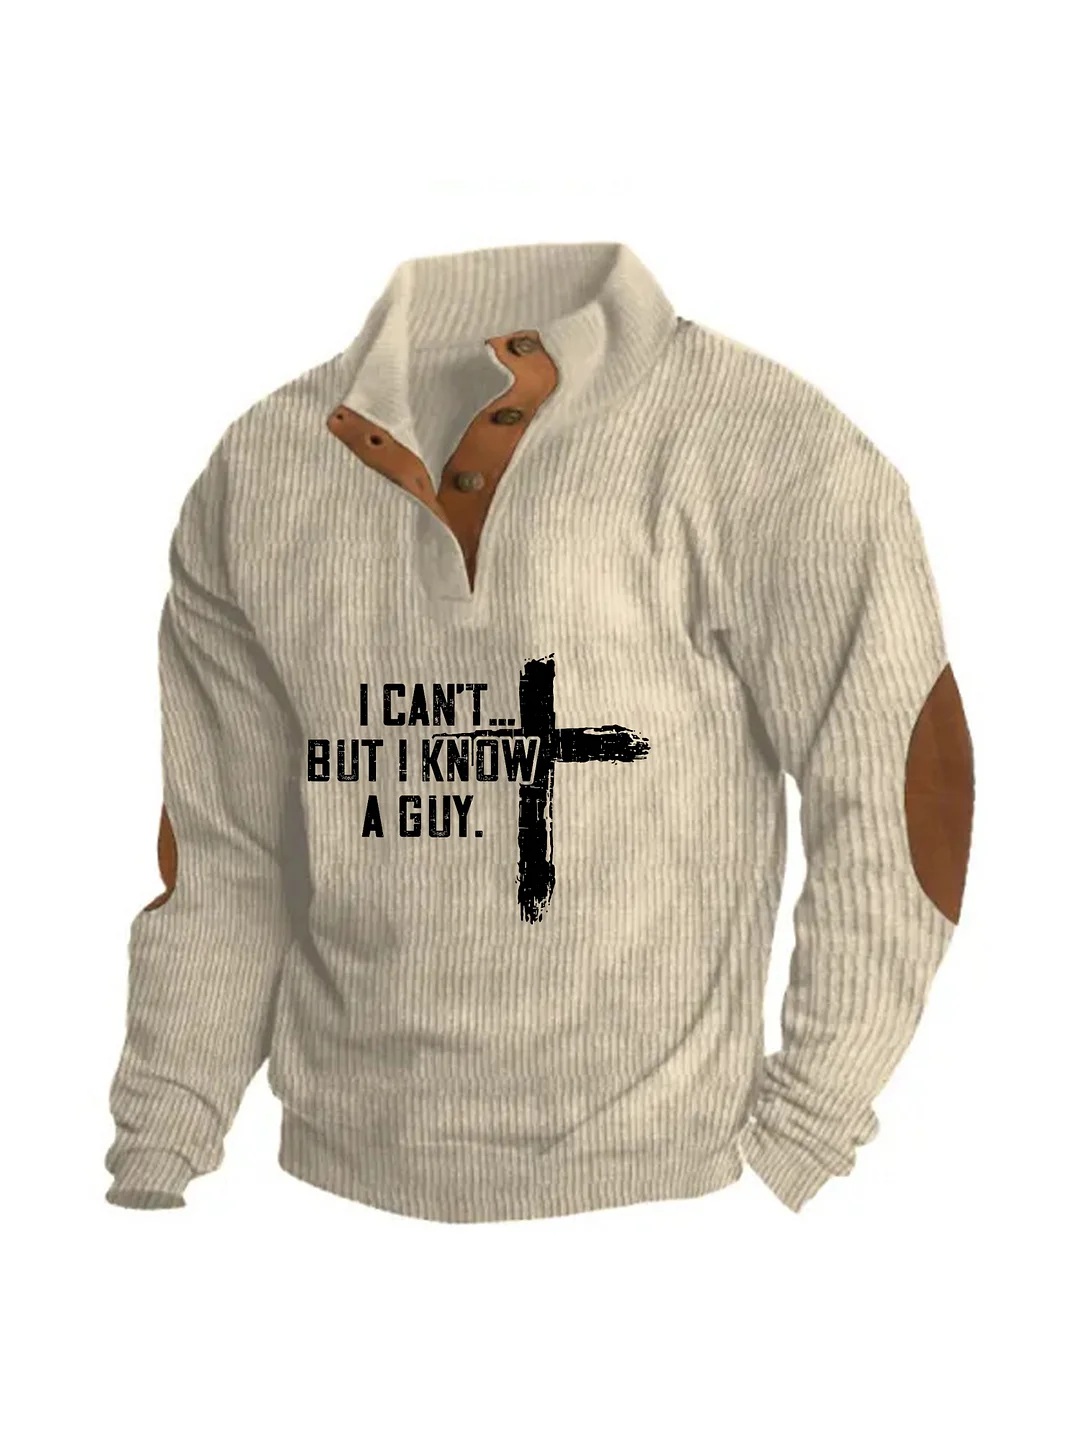 Men's I Can't But I Know A Guy Colorblock Stand Collar Sweatshirt